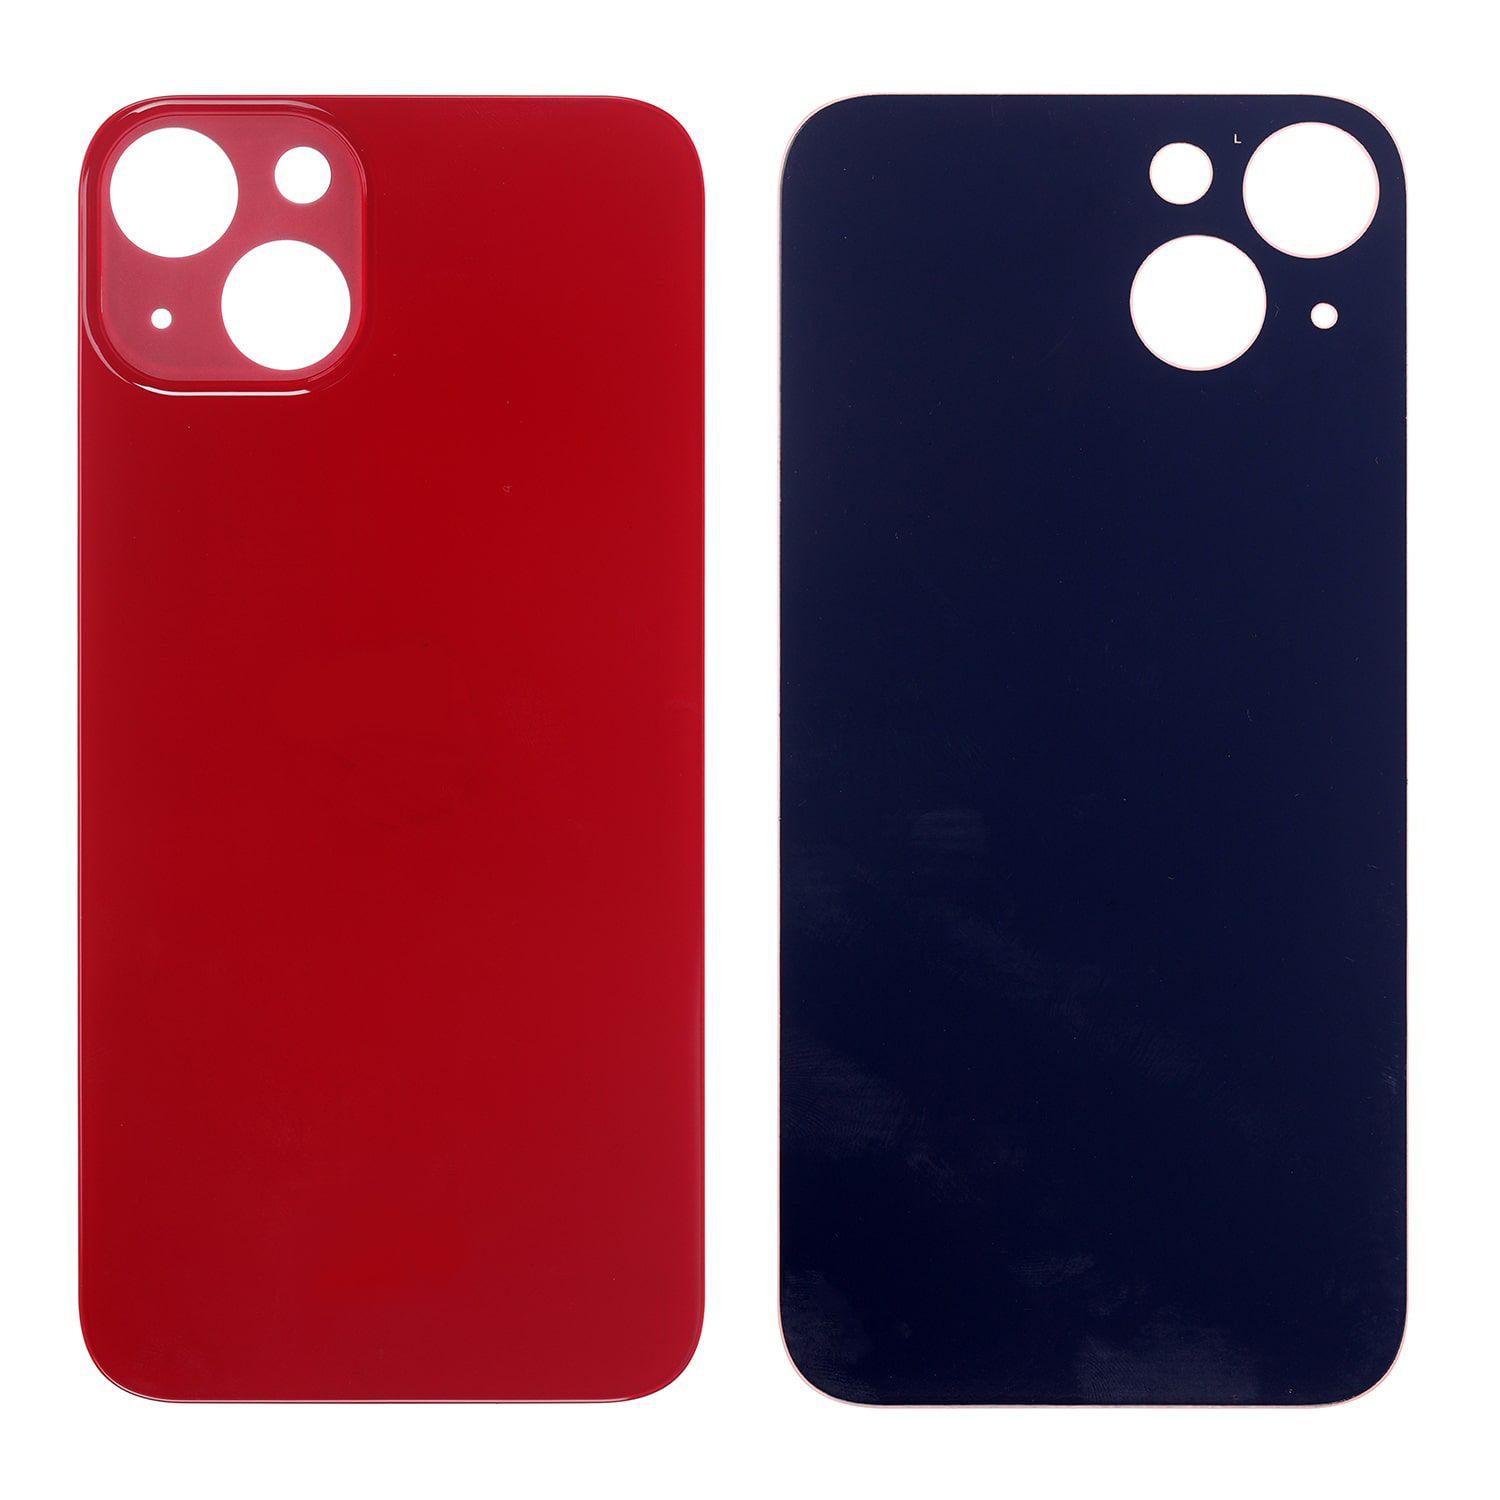 Battery cover iPhone 13 with bigger hole for camera glass - red